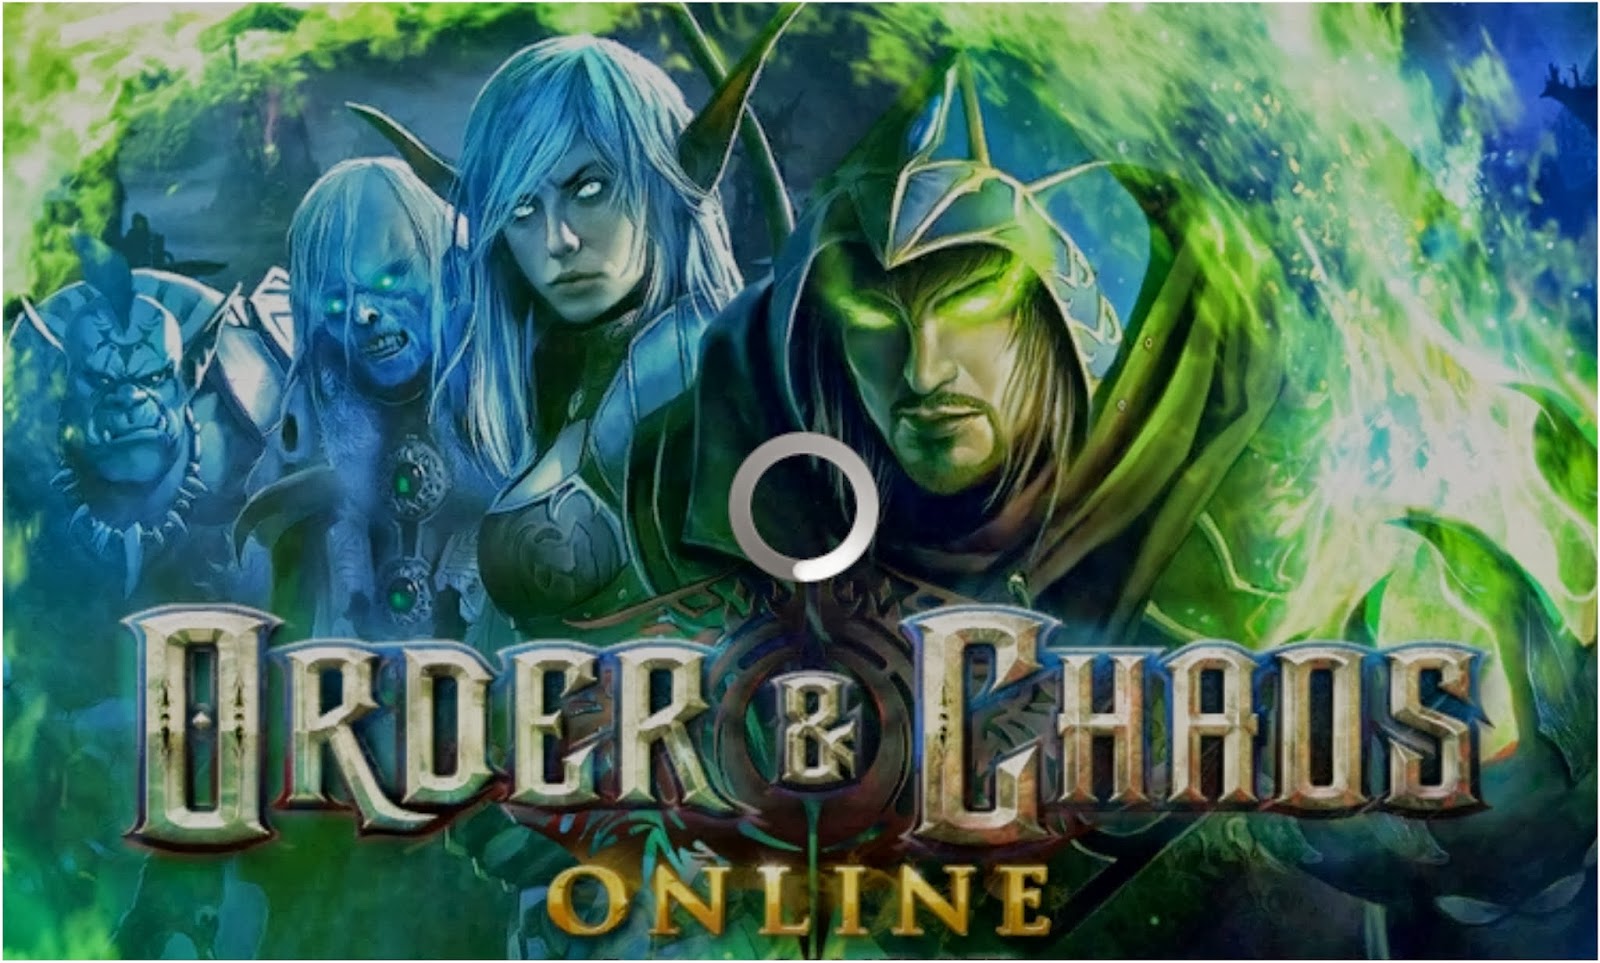 Order &amp; Chaos Online APK + SD Data | Android Games Download